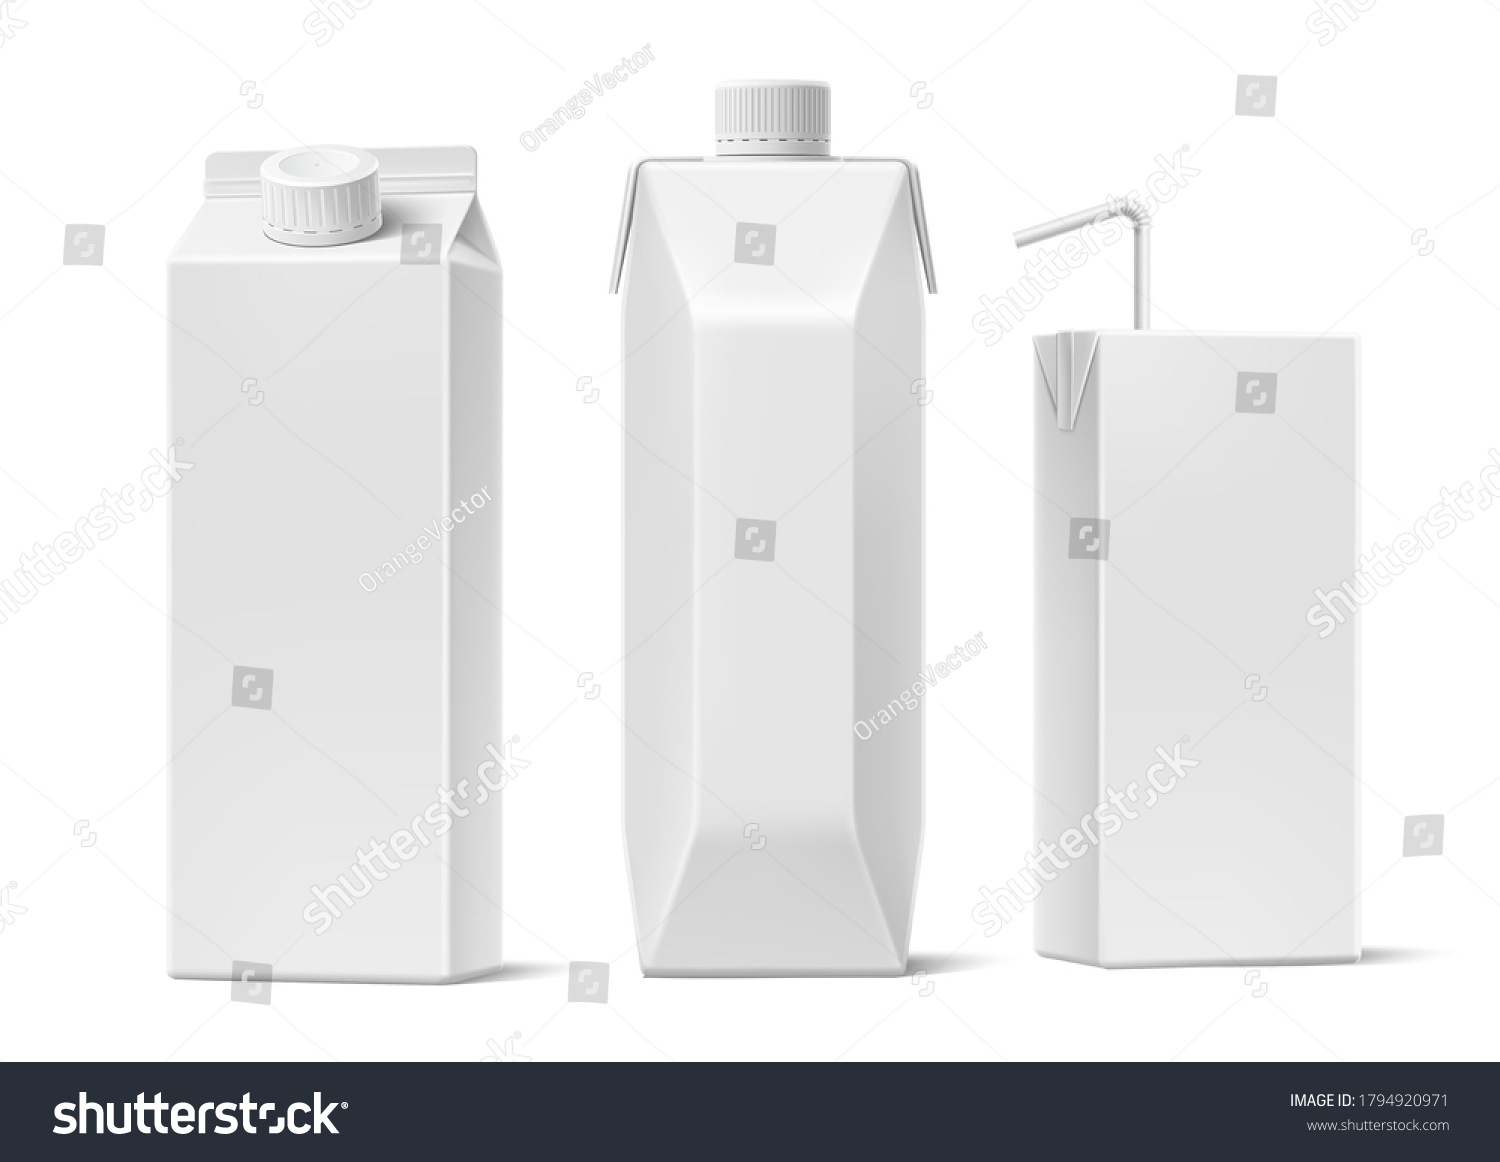 SVG of Realistic juice, milk cardboard packages mockup set. Vector dairy product, fruit drink blank container for product design. Realistic carton boxes for beverage branding. No label packaging. svg